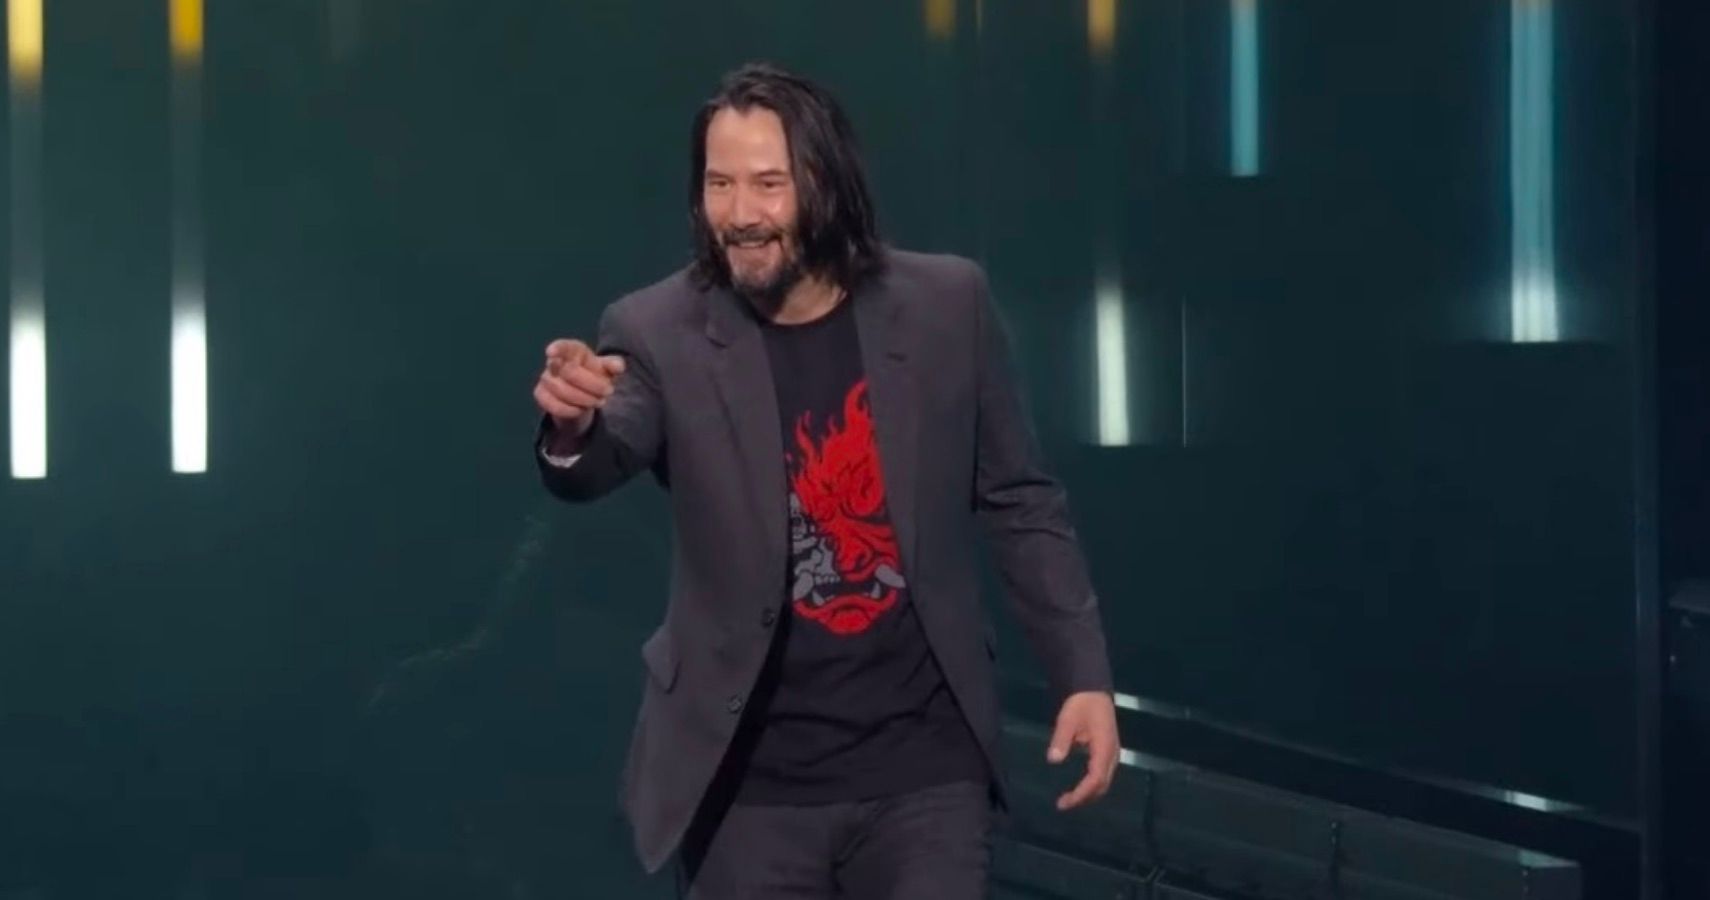 Keanu Reeves (Famous Actor Not Personality)